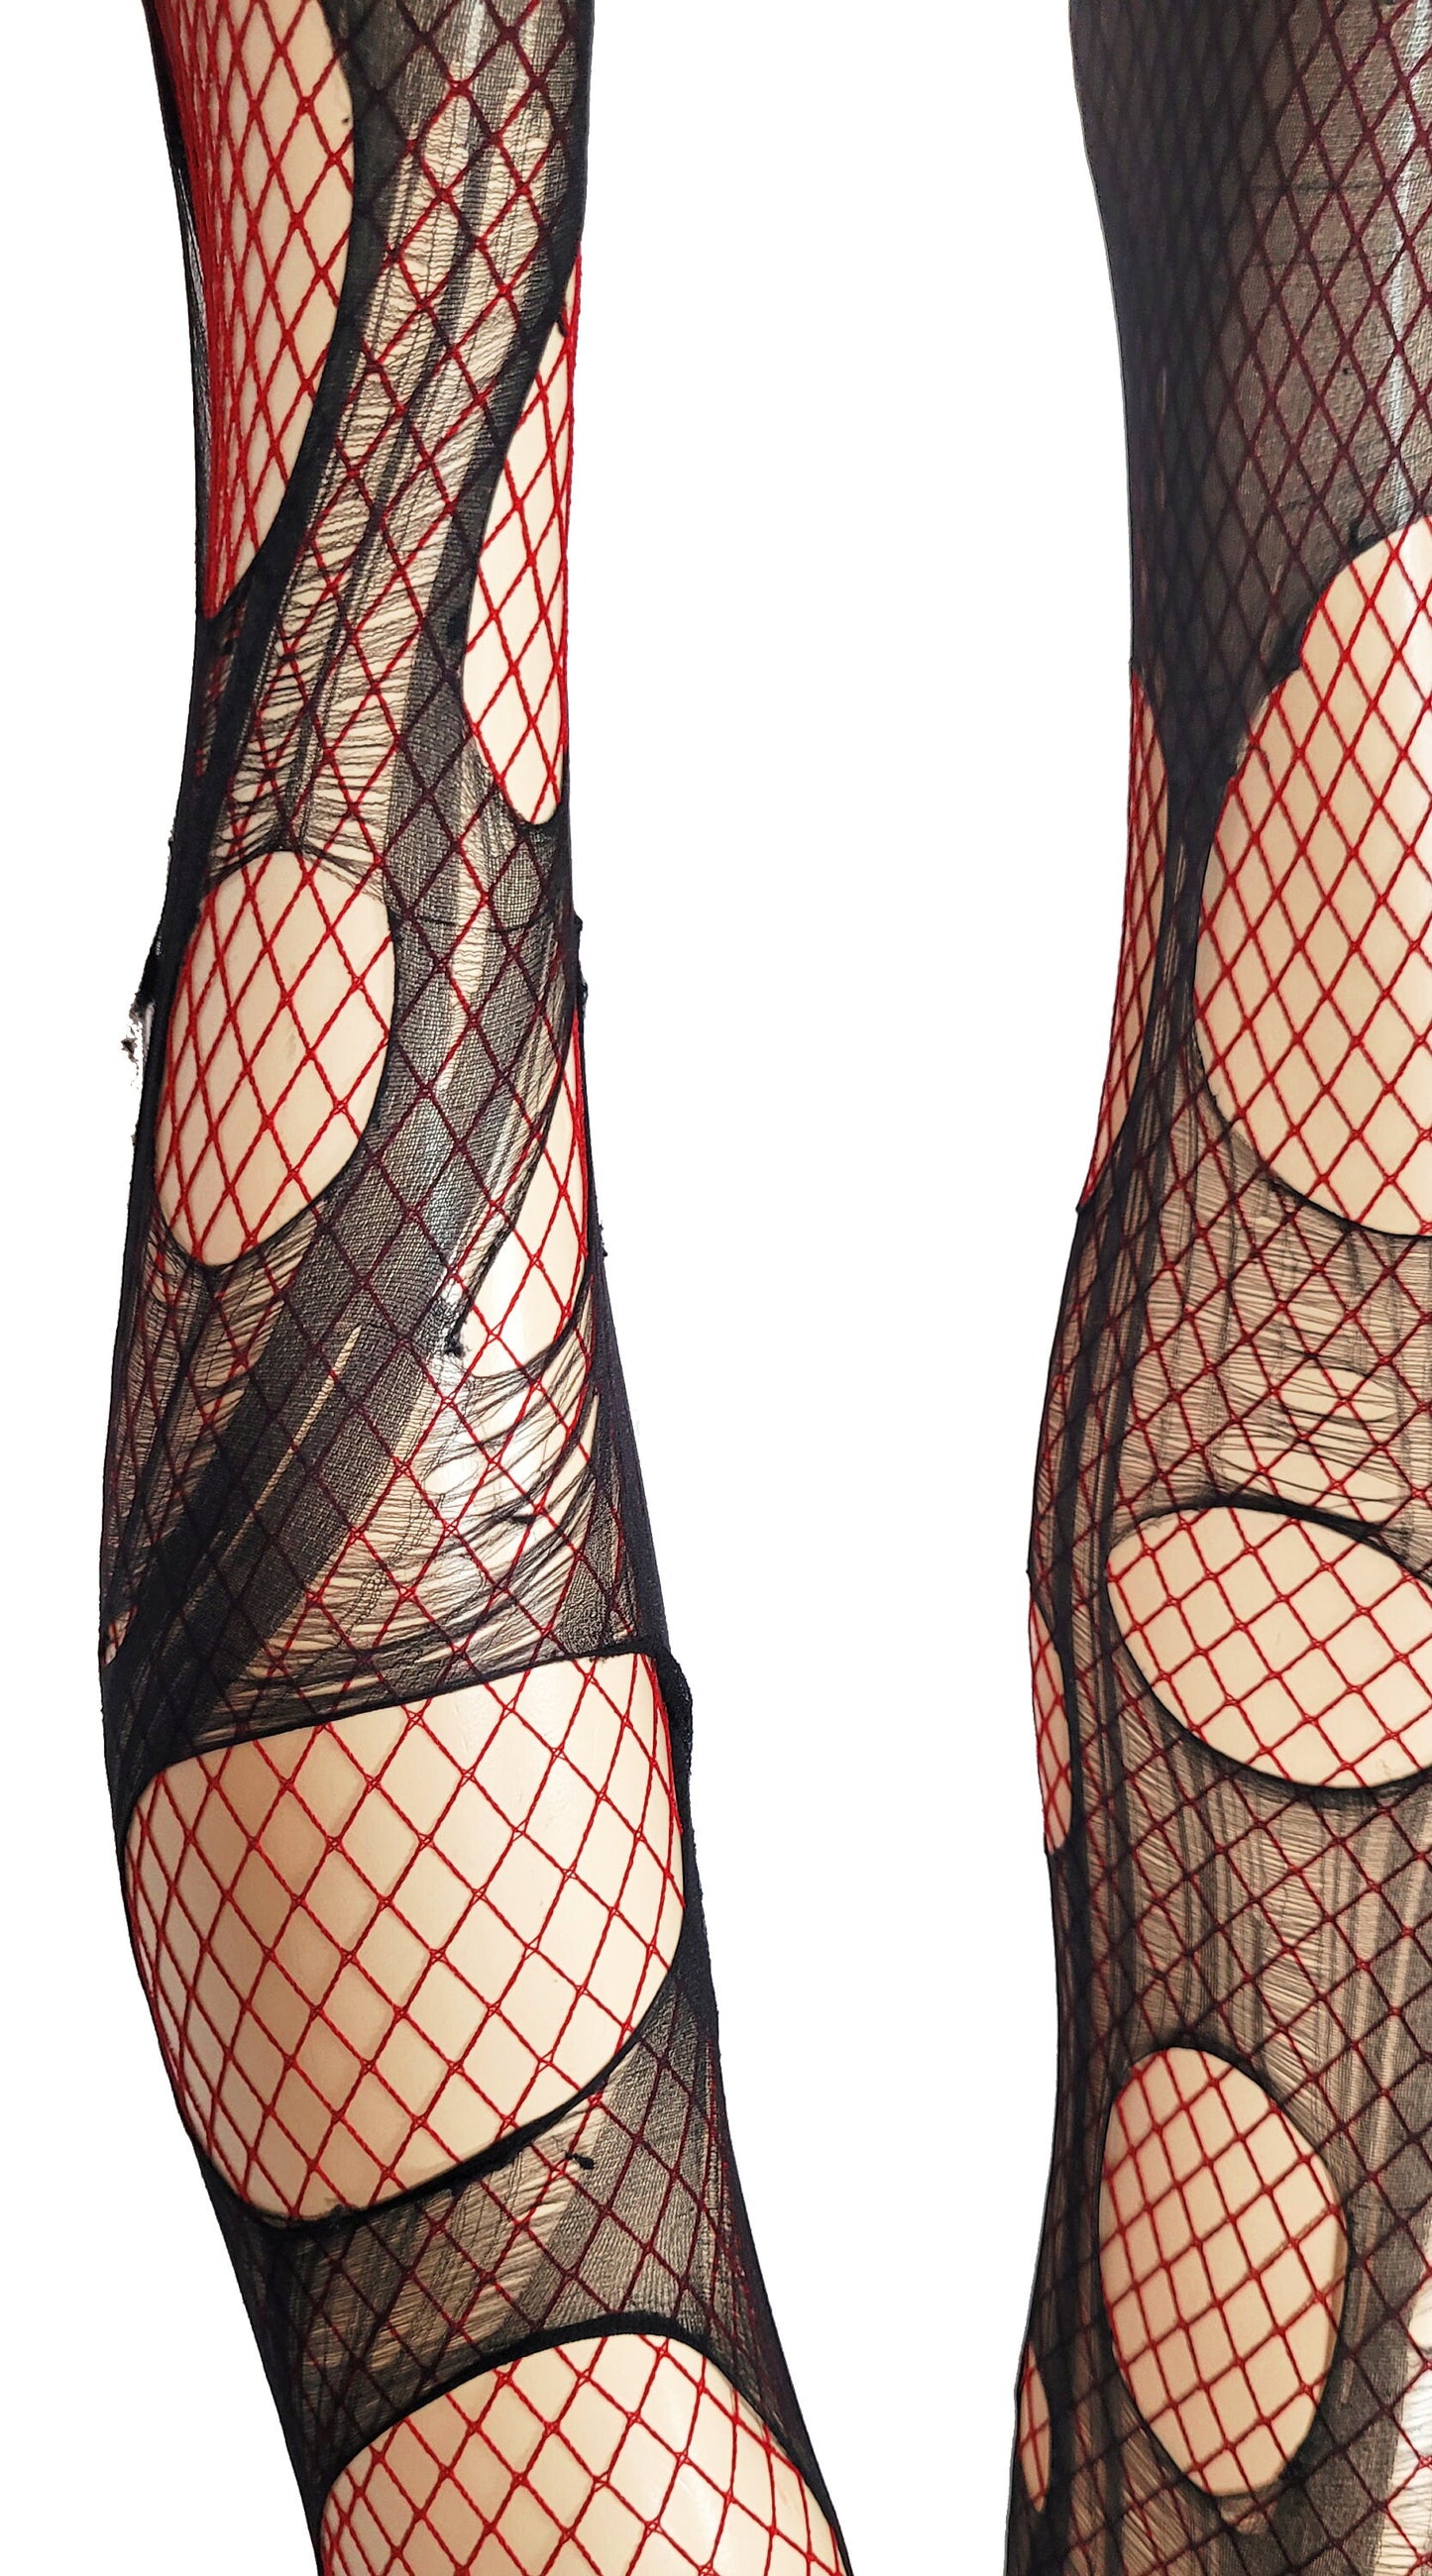 Dark red and black fishnet tights | fishnet stockings punk tights nu goth tights witch tights | double layered tattered & torn tights |